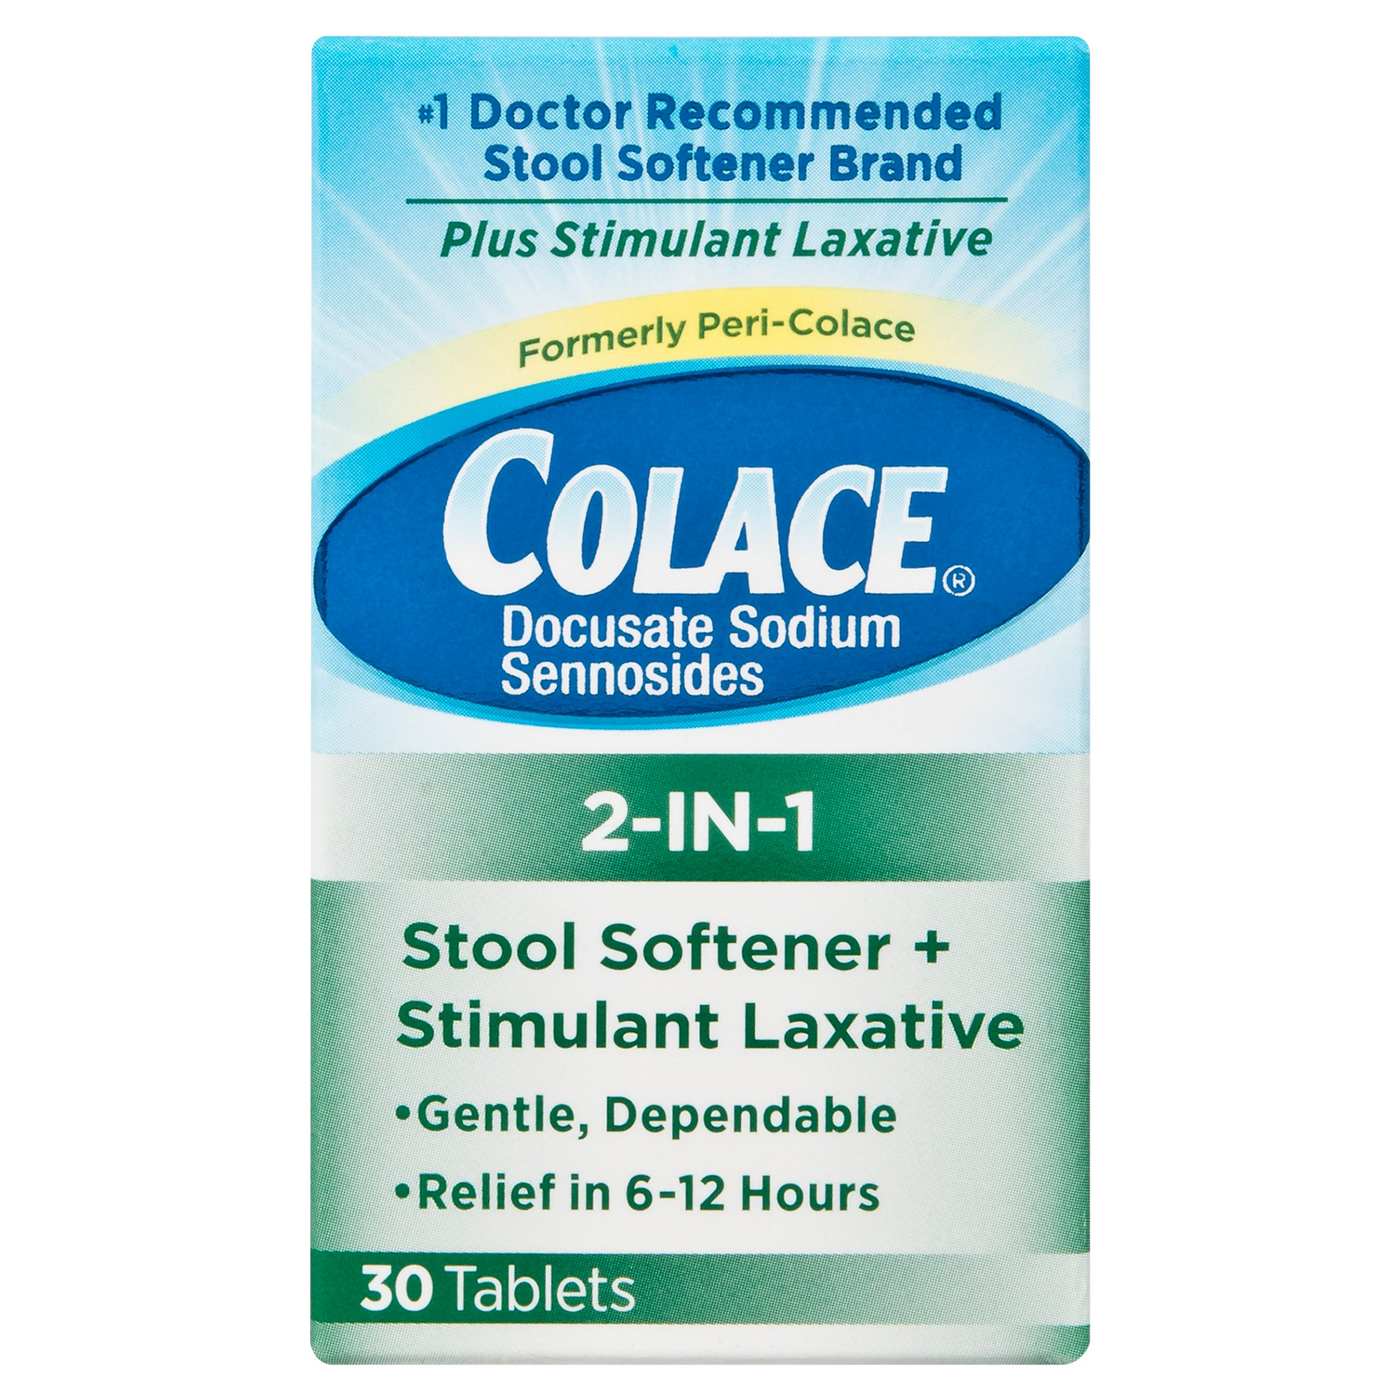 Colace Stool Softener + Laxative Tablets; image 1 of 4